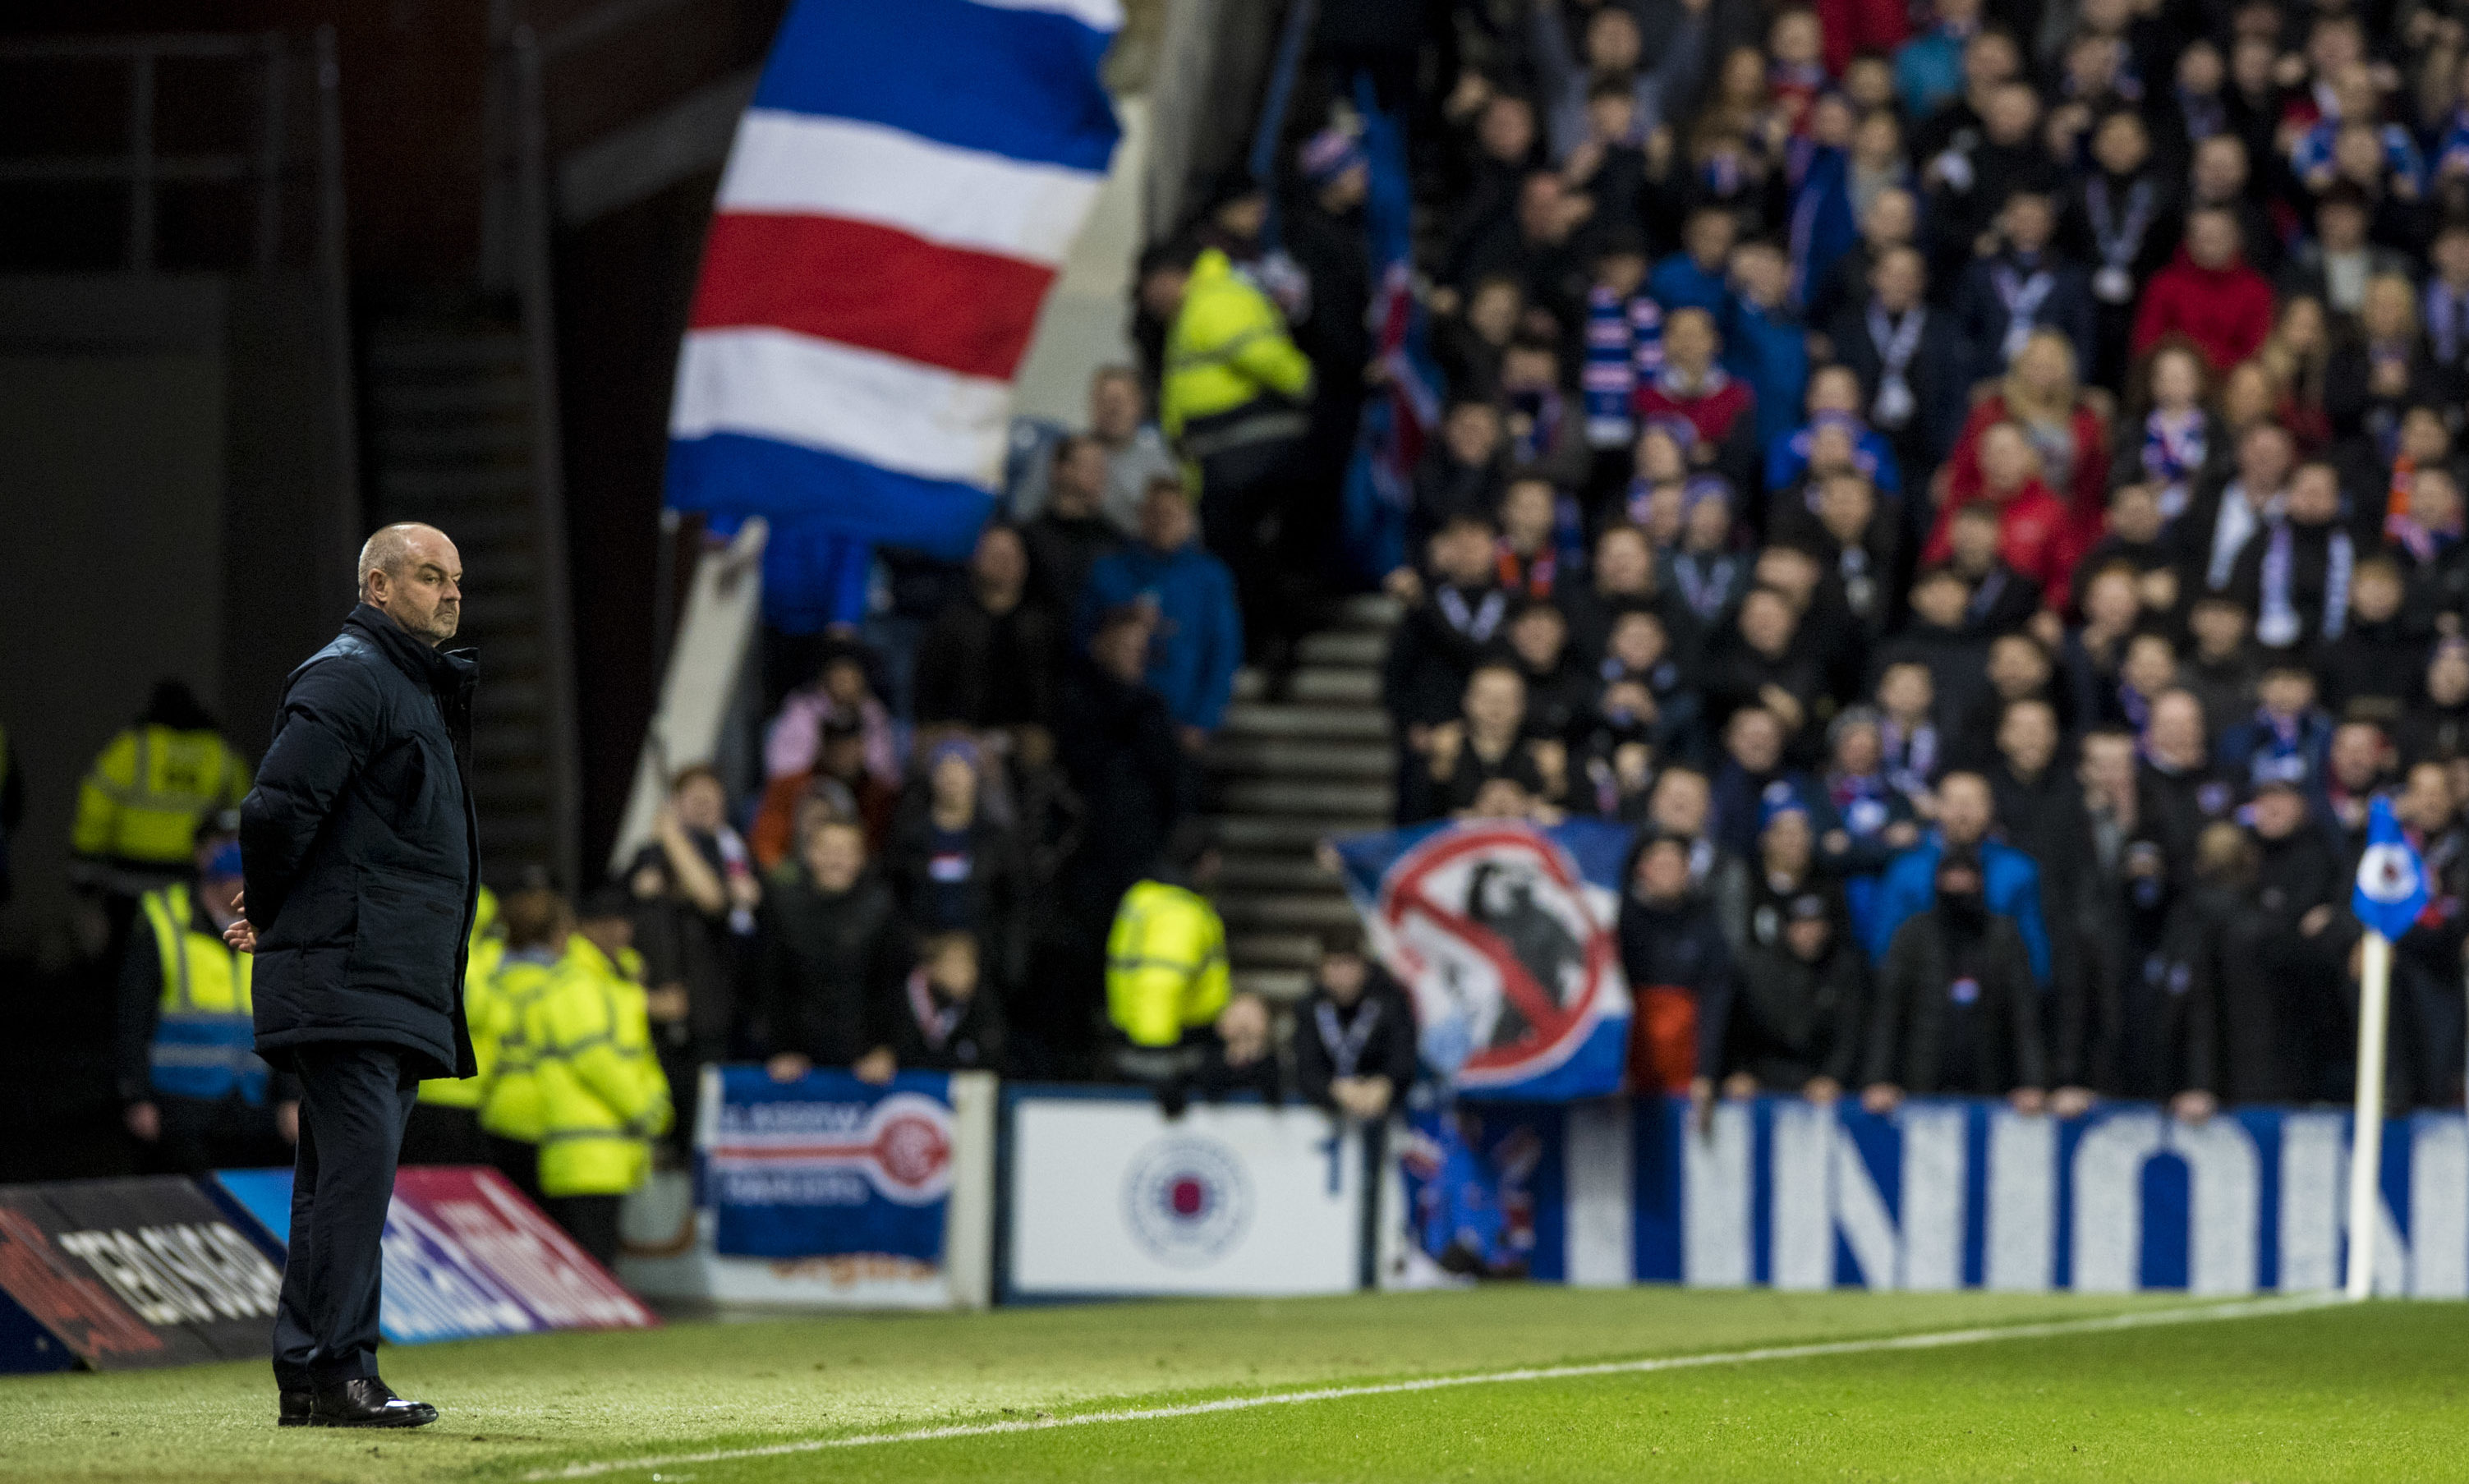 Kilmarnock manager Steve Clarke says he was subjected to sectarian abuse throughout the cup clash at Ibrox.